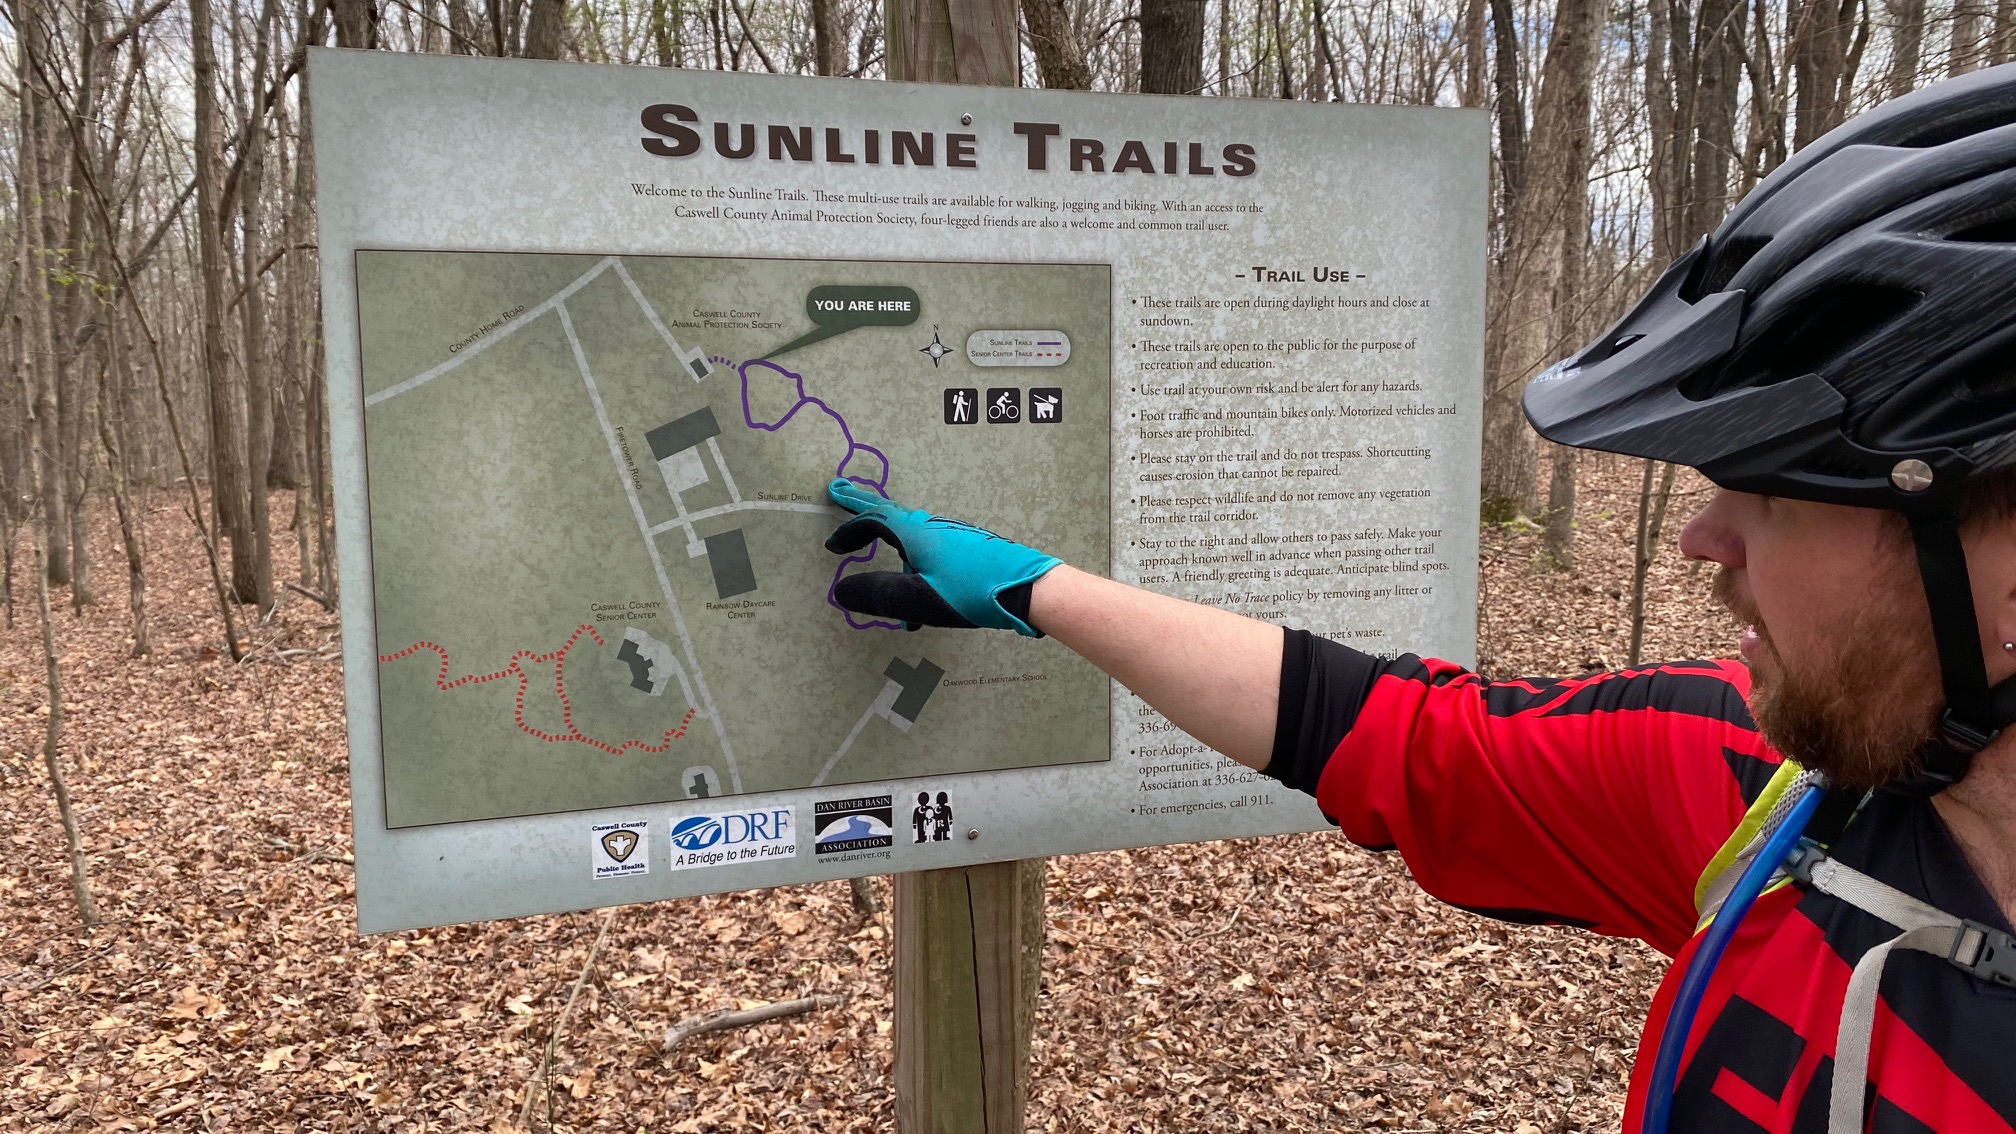 Mike Wilkins examines the map for the Sunline Trail